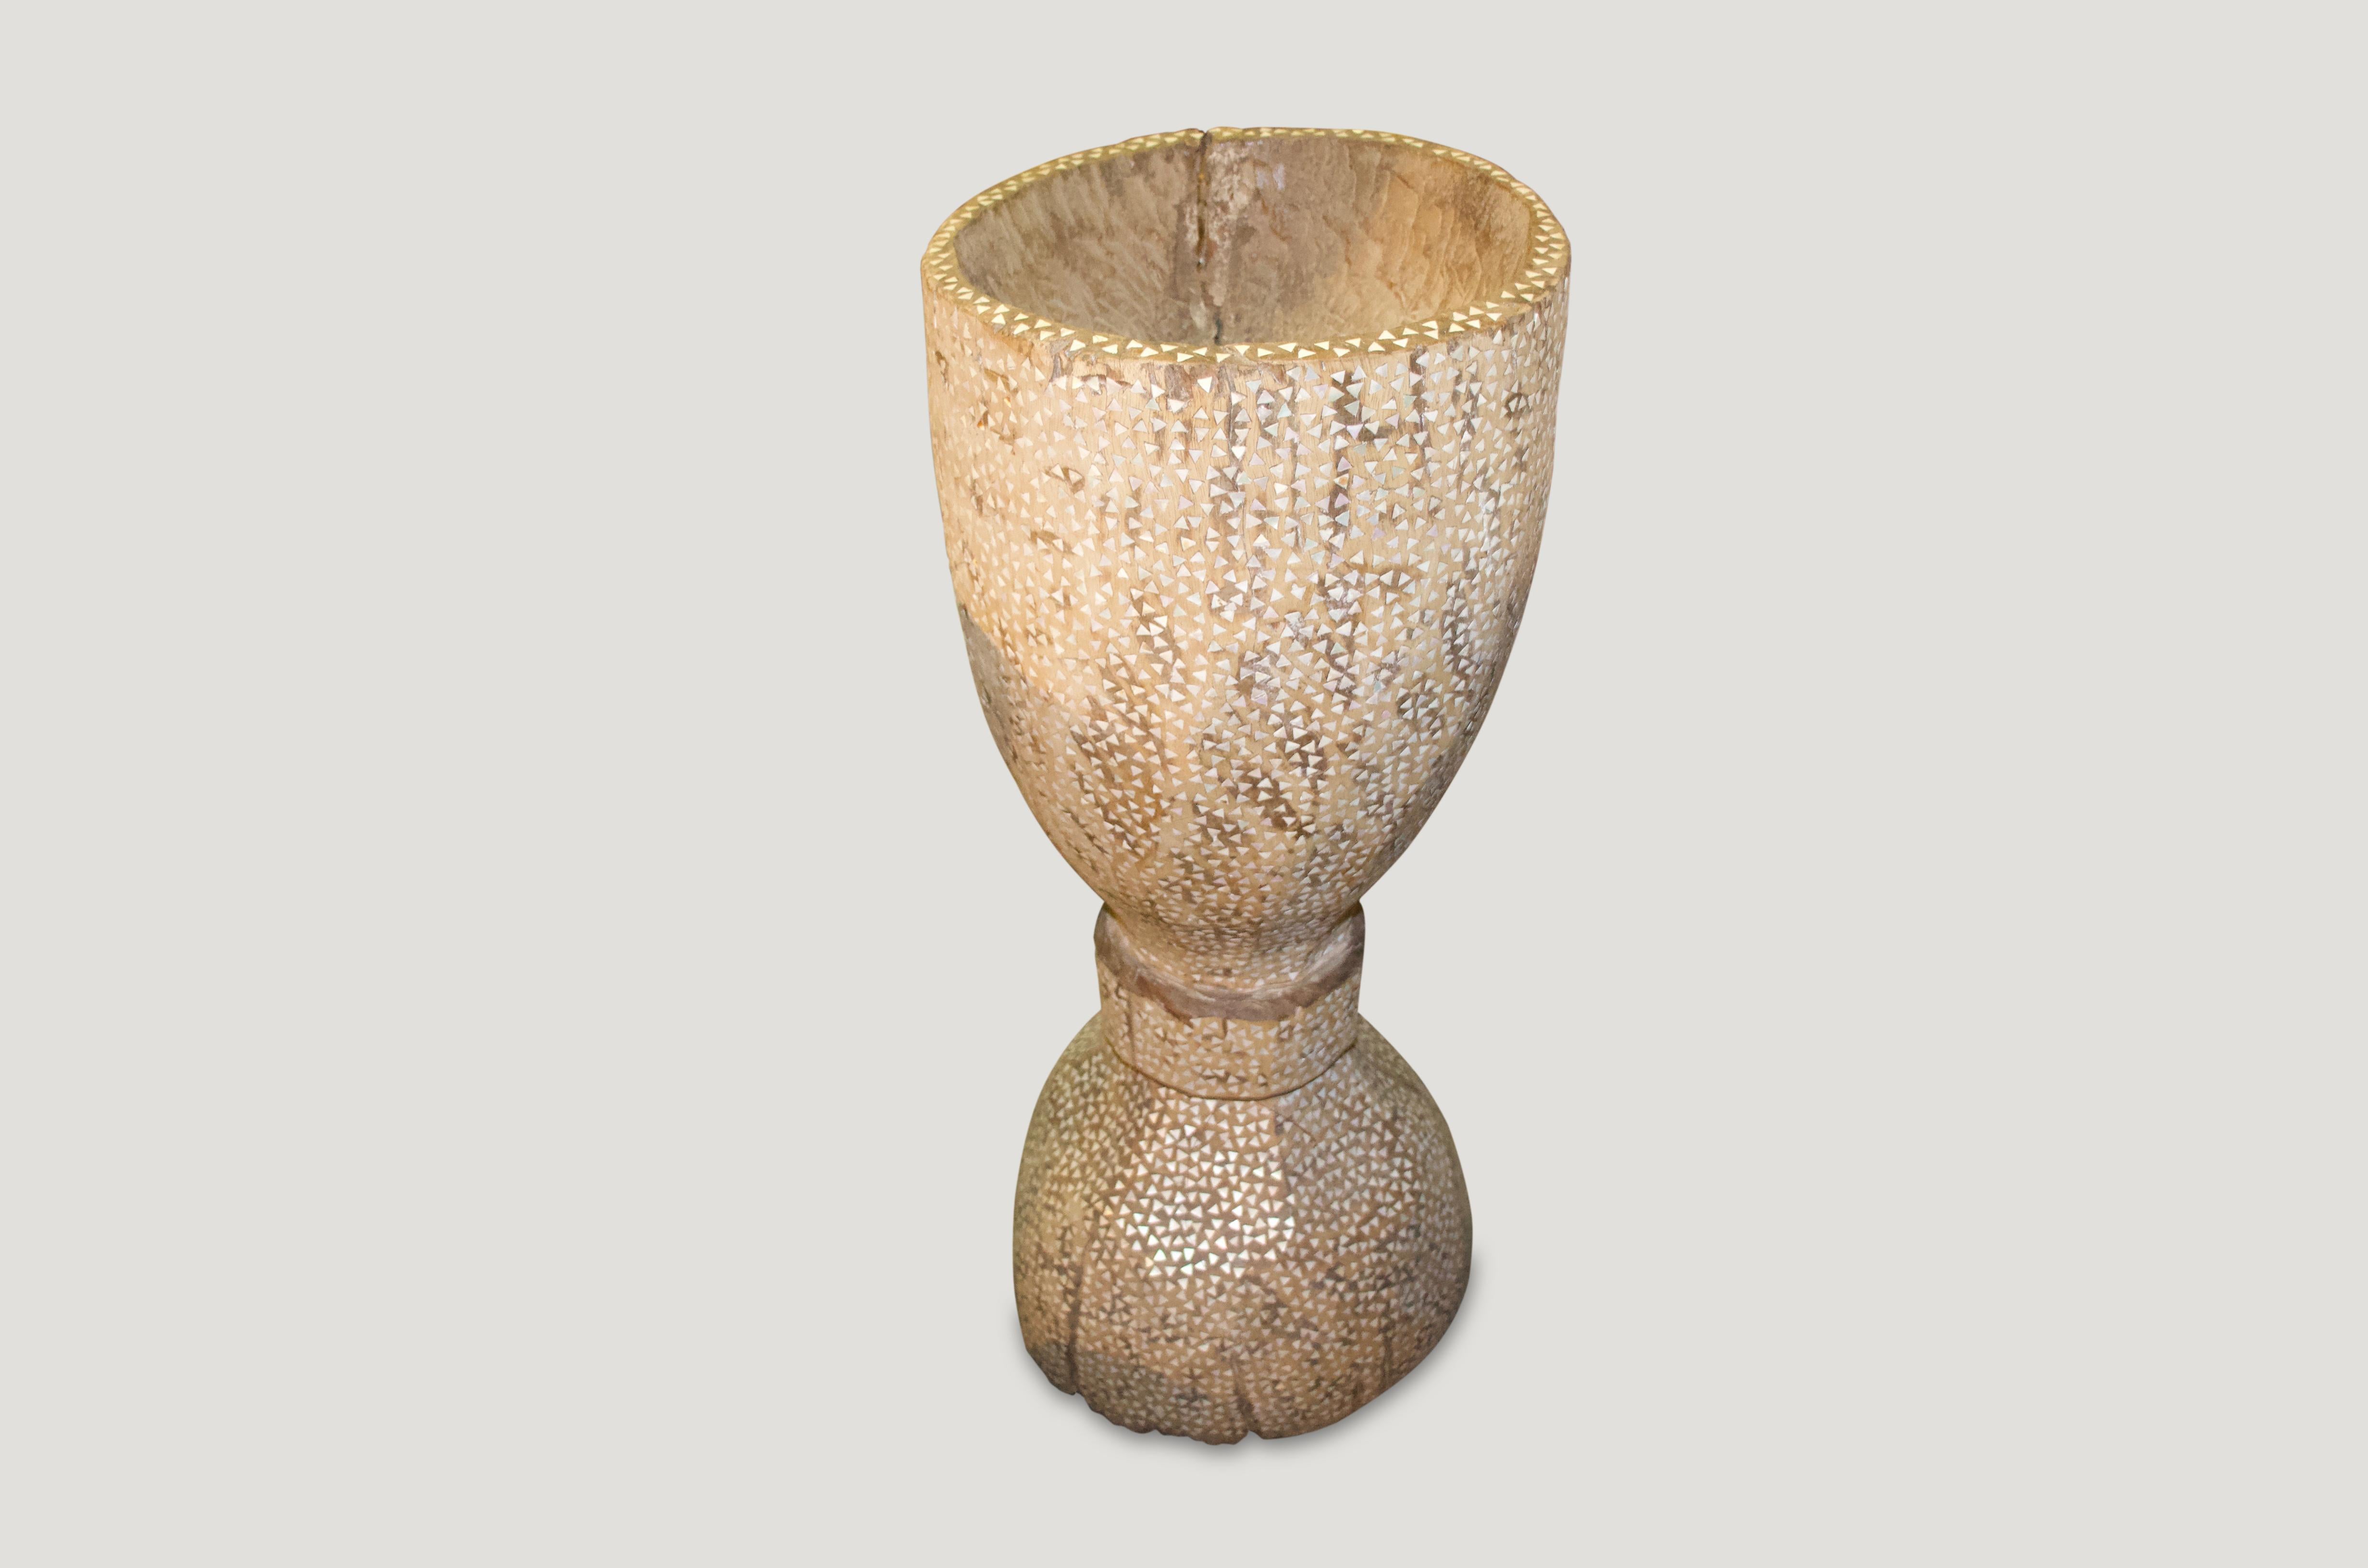 Antique rice pounder hand carved from a single teak root. We added the shell inlay. Beautiful as a sculpture, holding towels or great as a champagne holder for parties. Also as a table base with a glass top.

This rice pounder was sourced in the